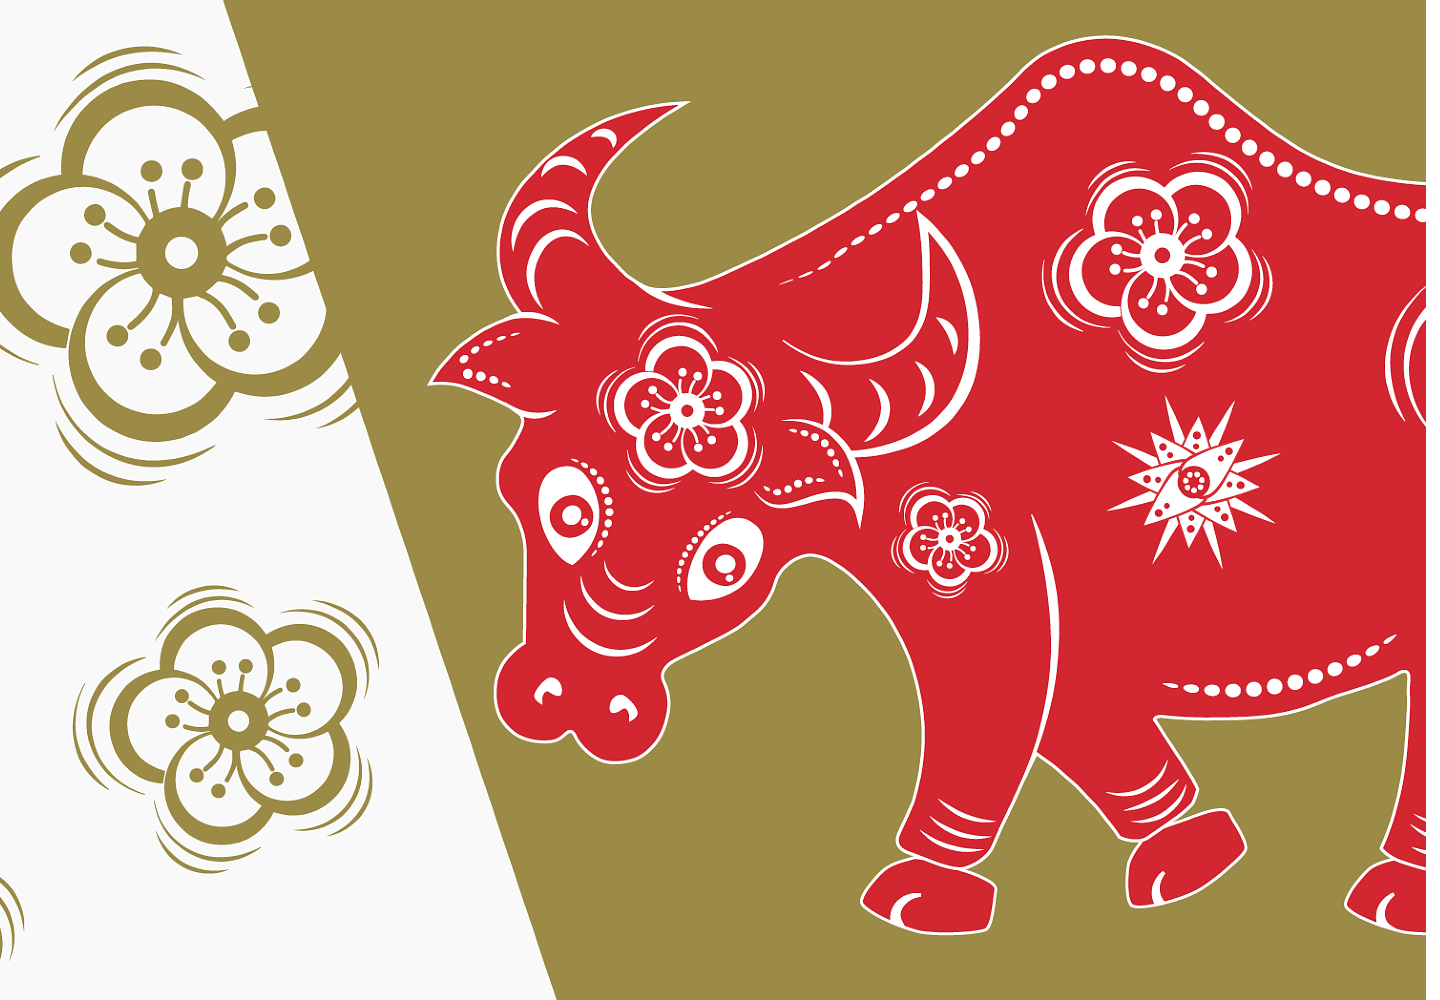 Lunar New Year: Celebrating the Year of the Ox